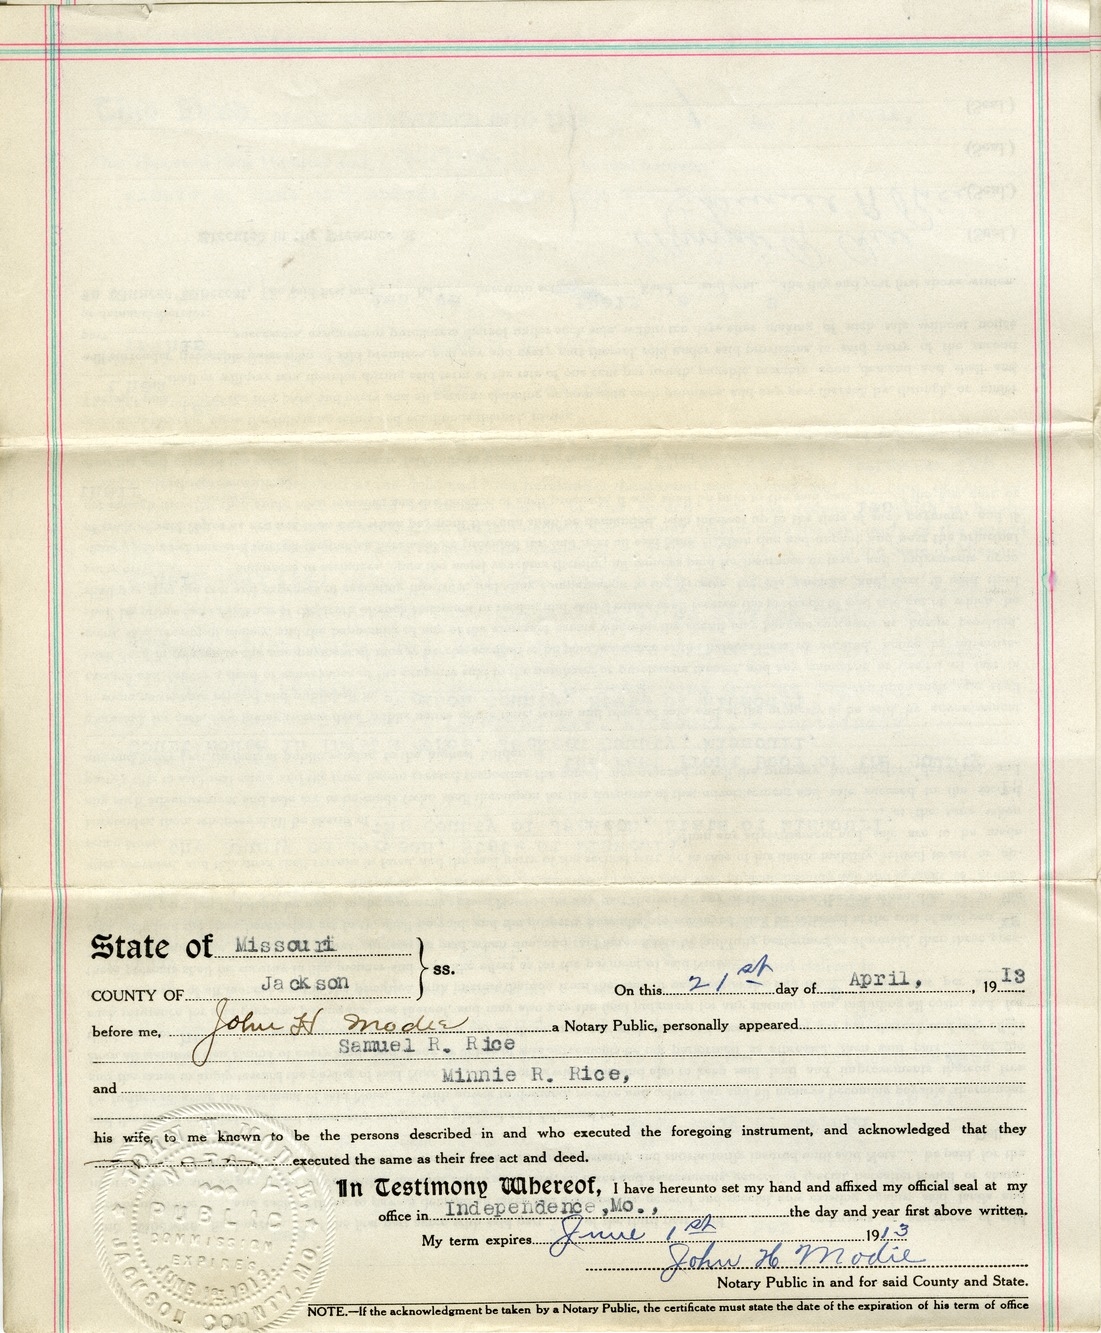 Deed of Trust from Minnie R. Rice and Samuel R. Rice to Albert M. Ott for Mary B. Noland